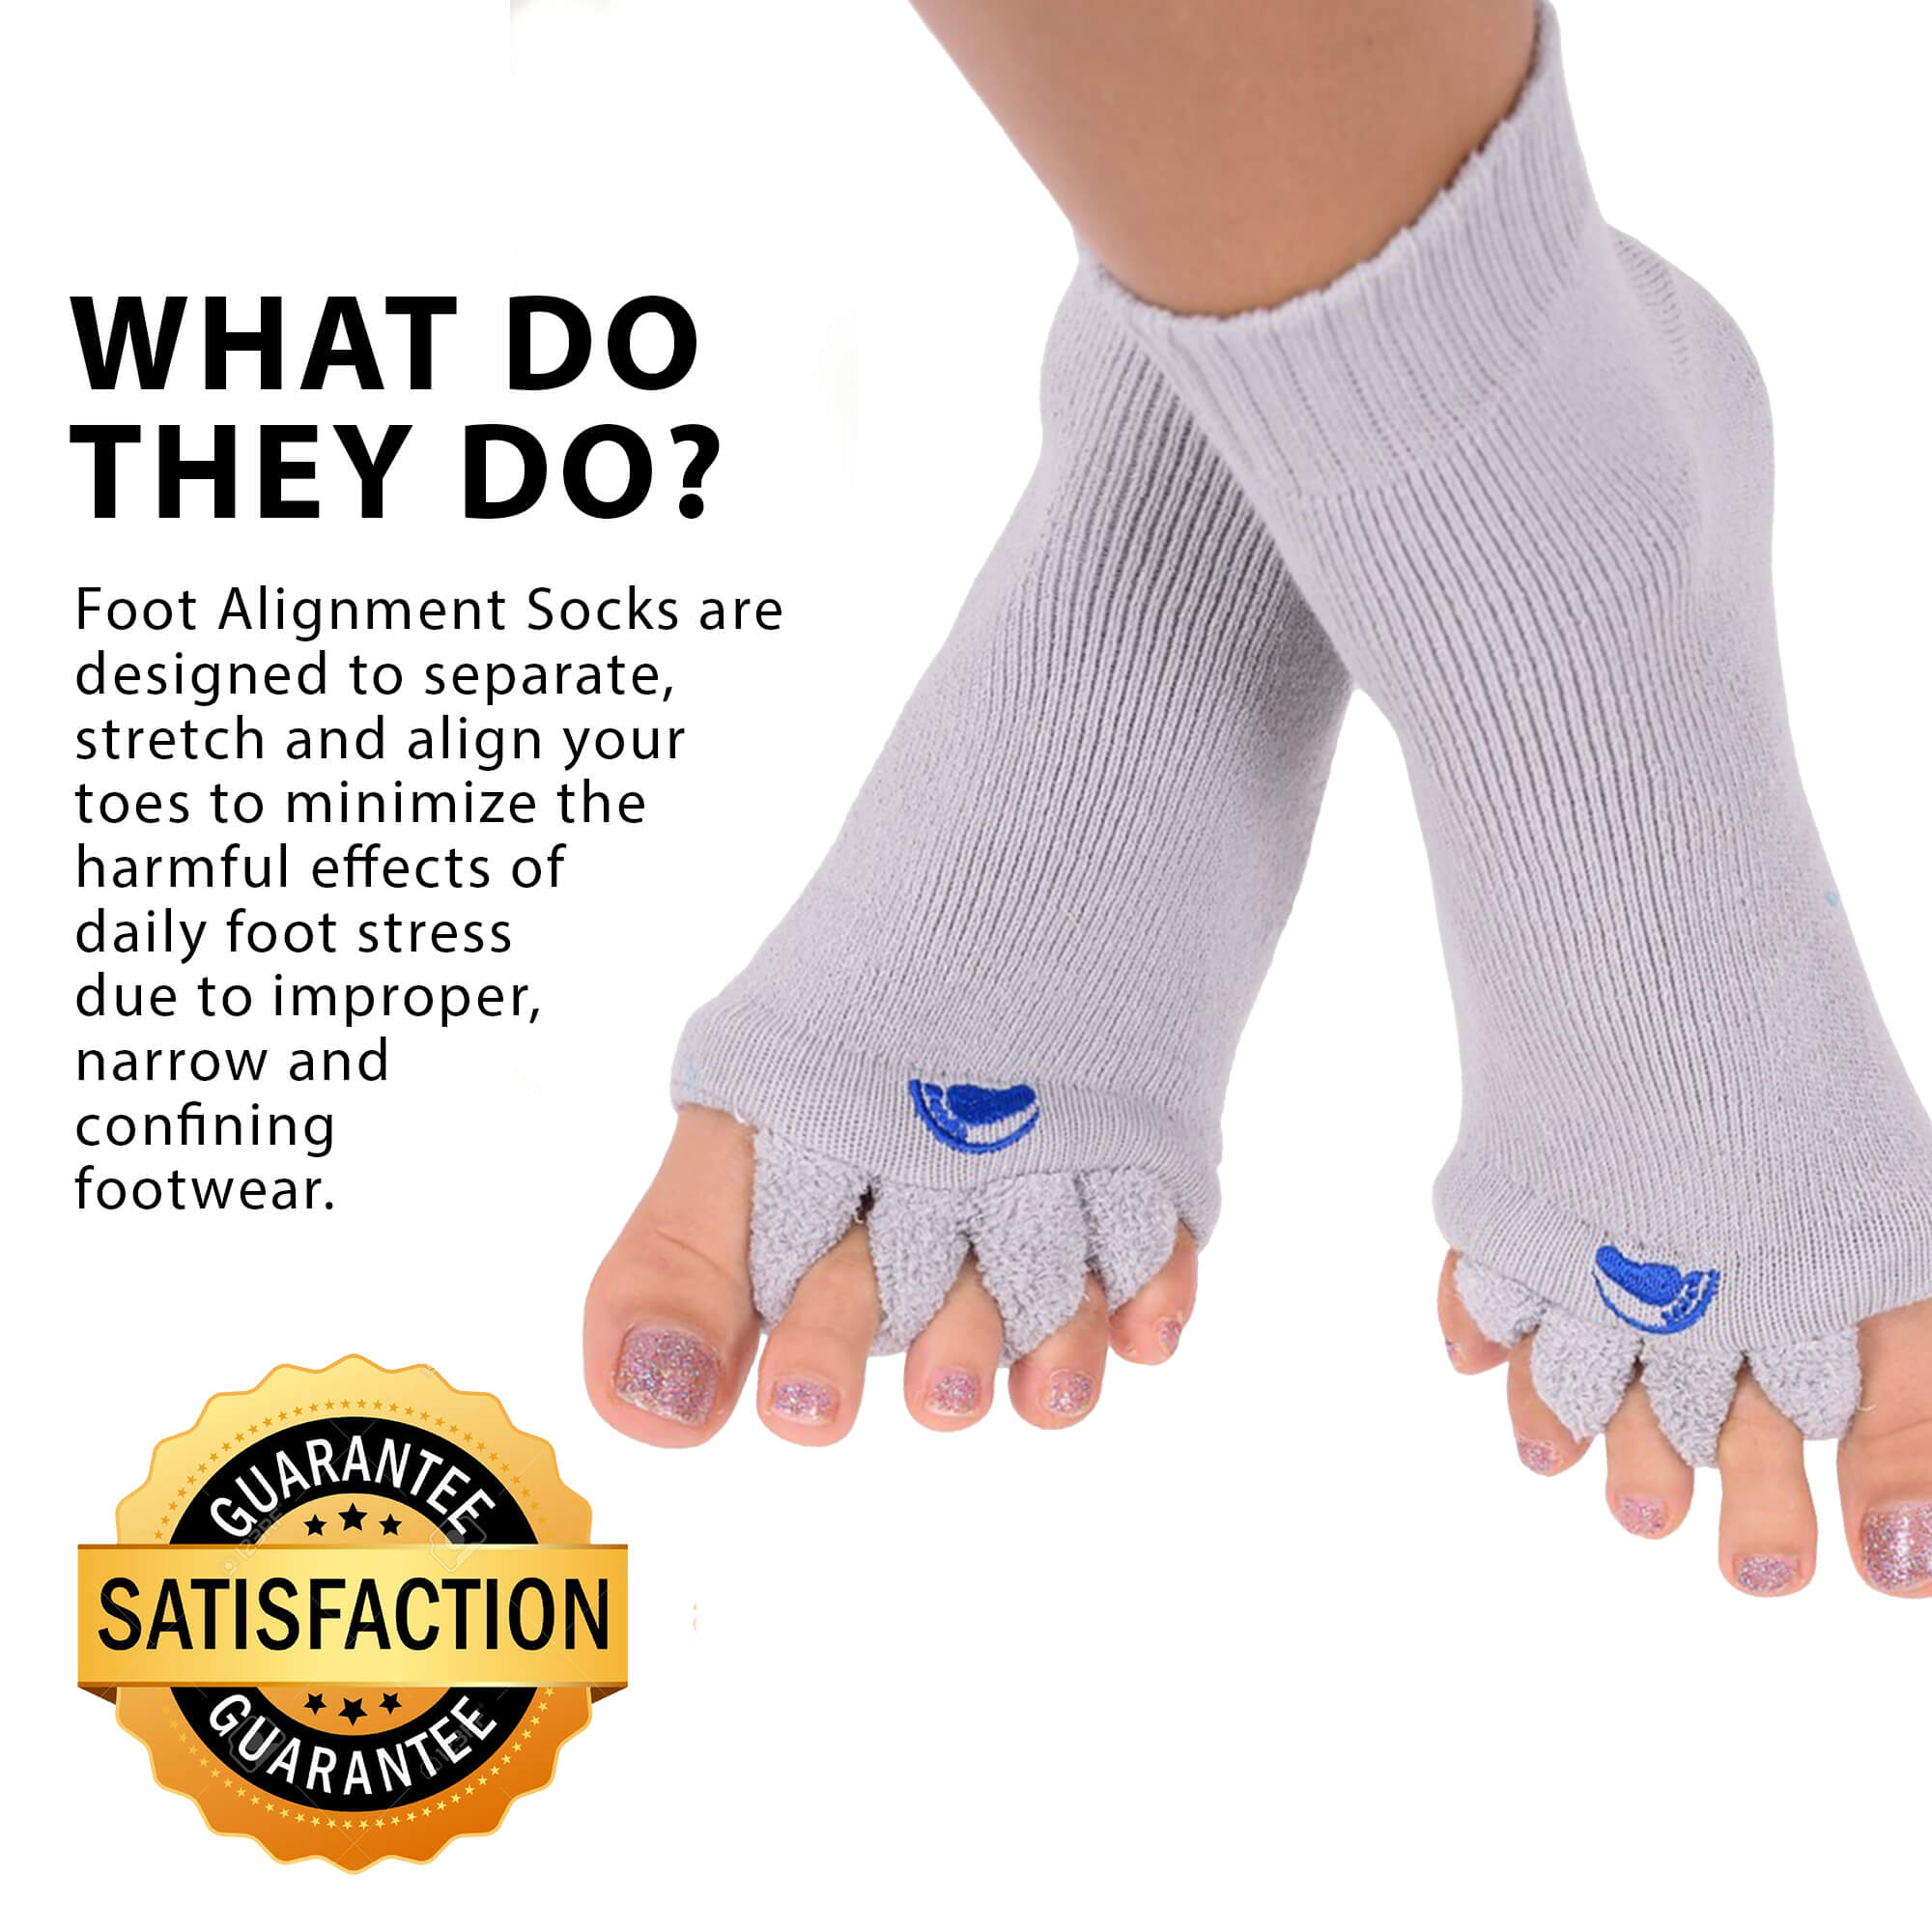 Joy-a-Toes Toe Spreaders, Toe Stretcher & Toe Spacers for feet